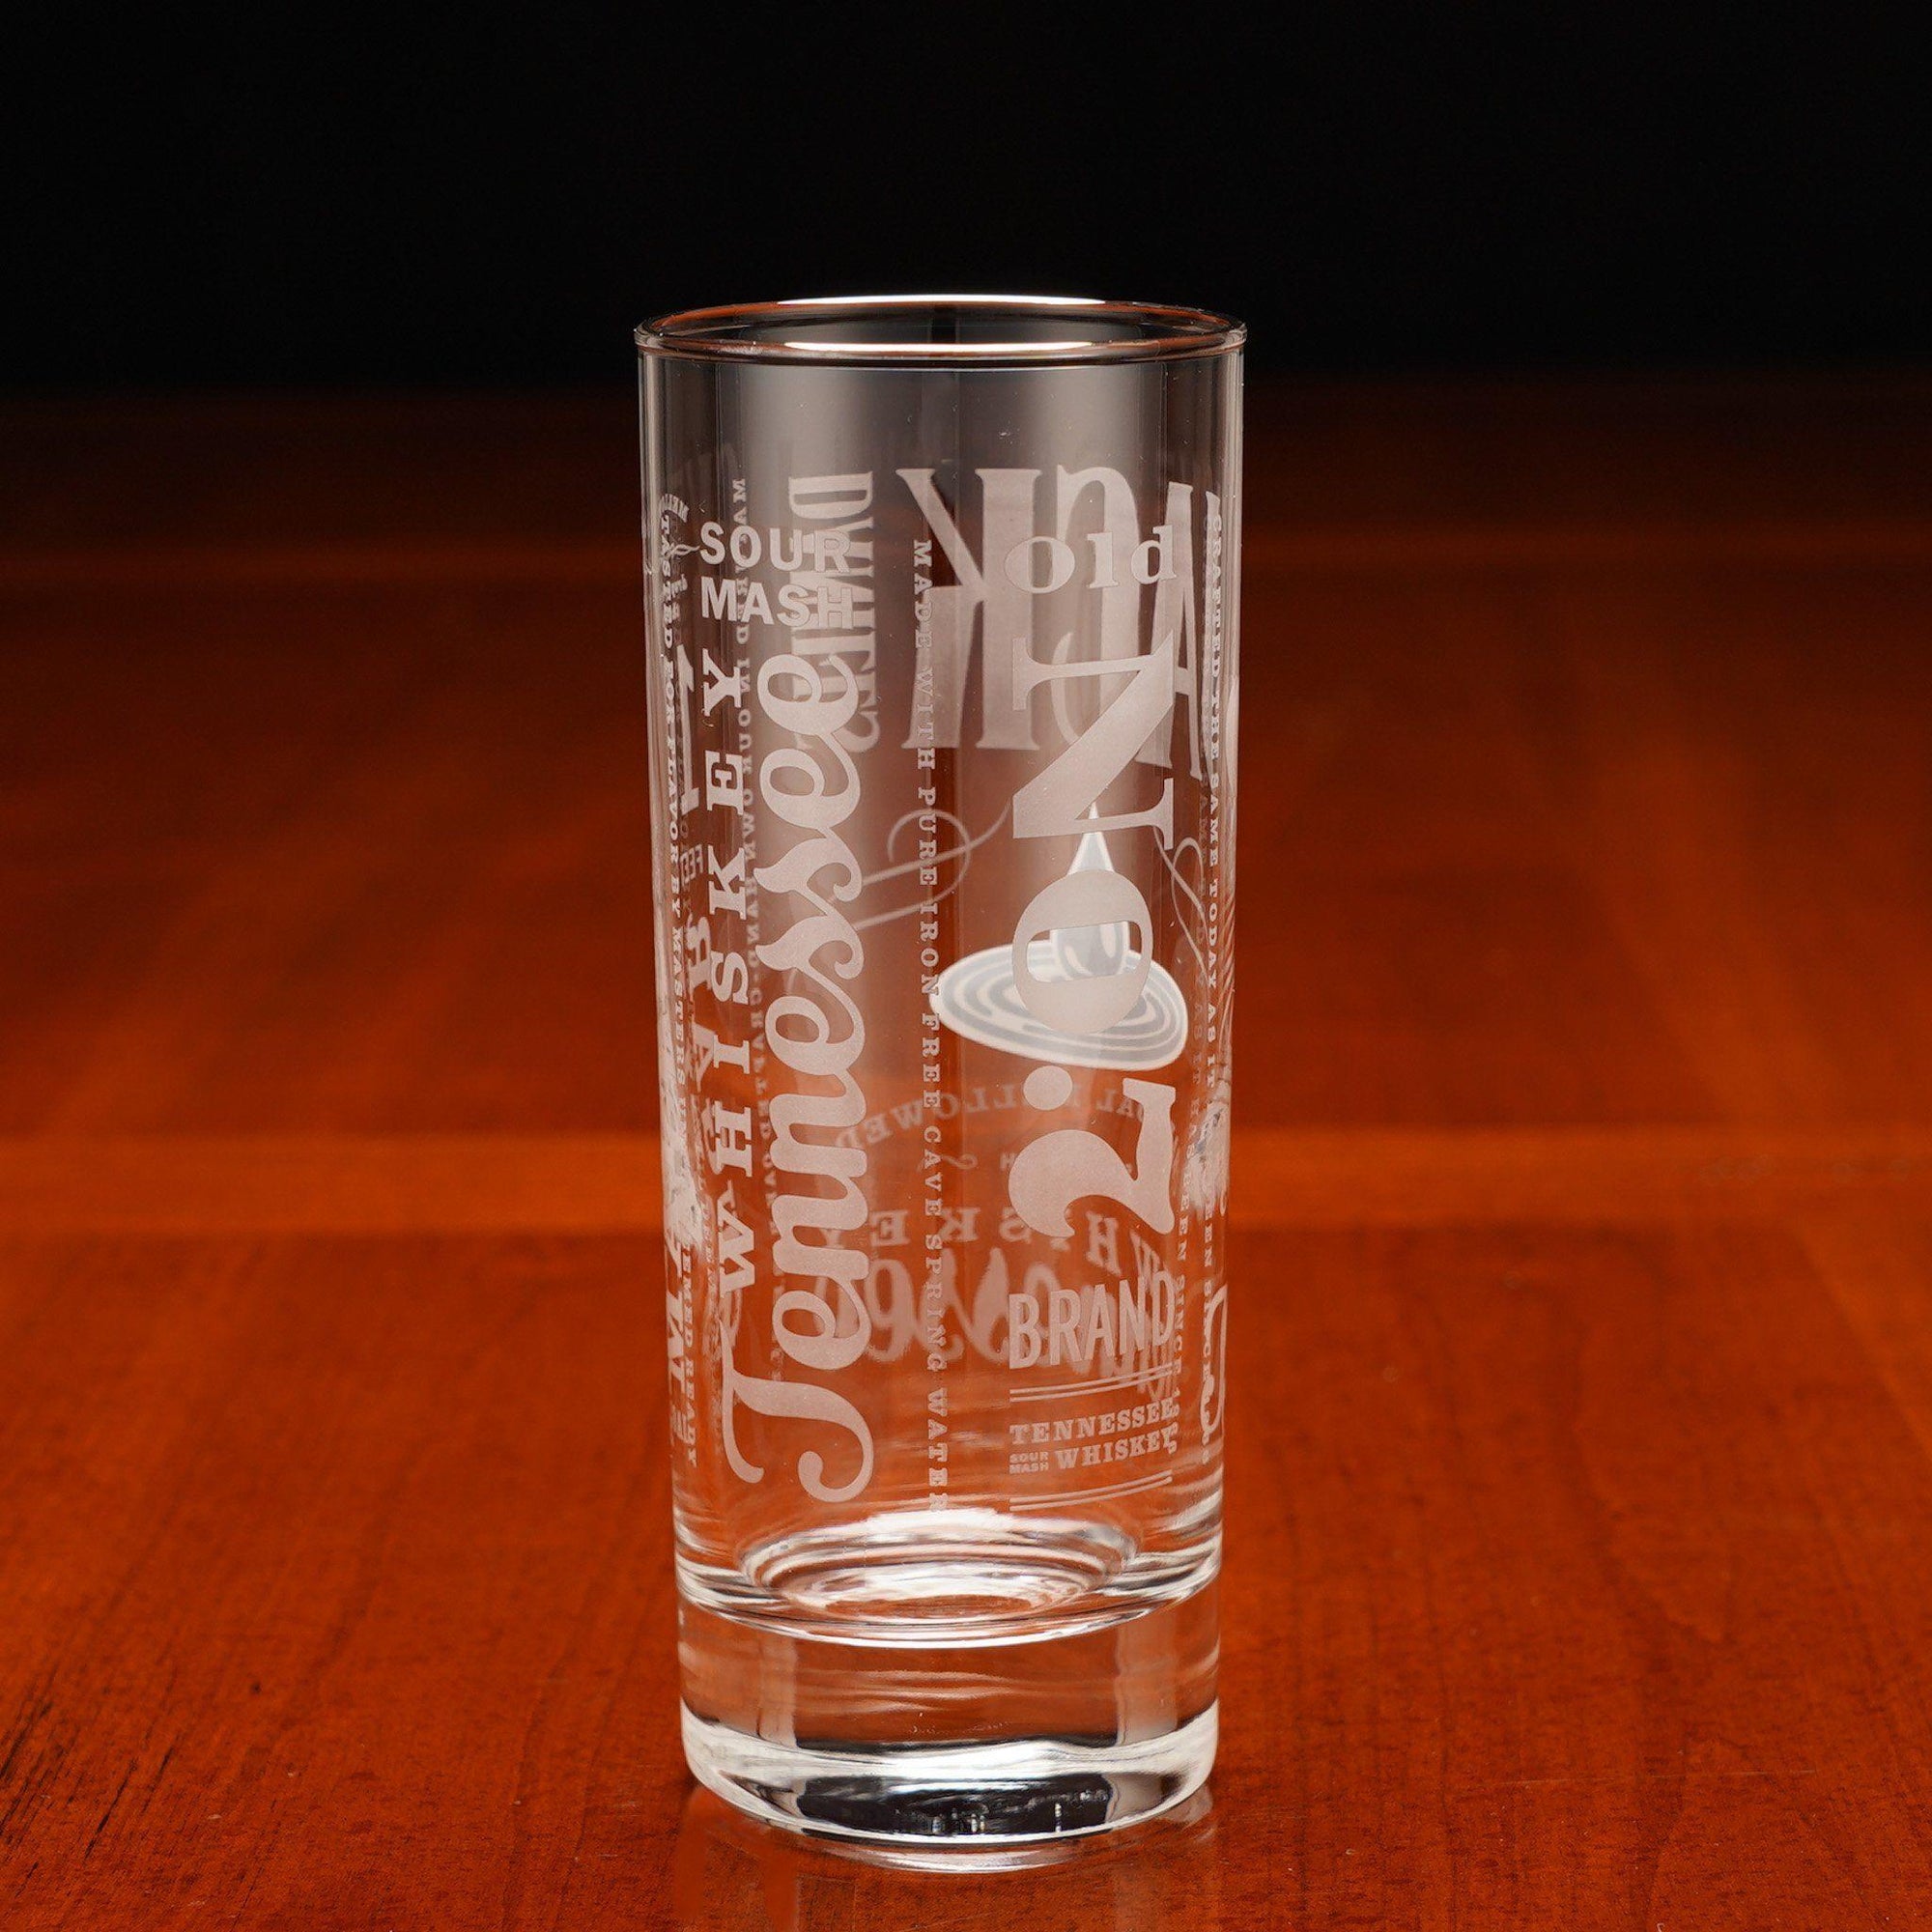 Jack Daniel’s Silver Rimmed Drop by Drop Glass - The Whiskey Cave